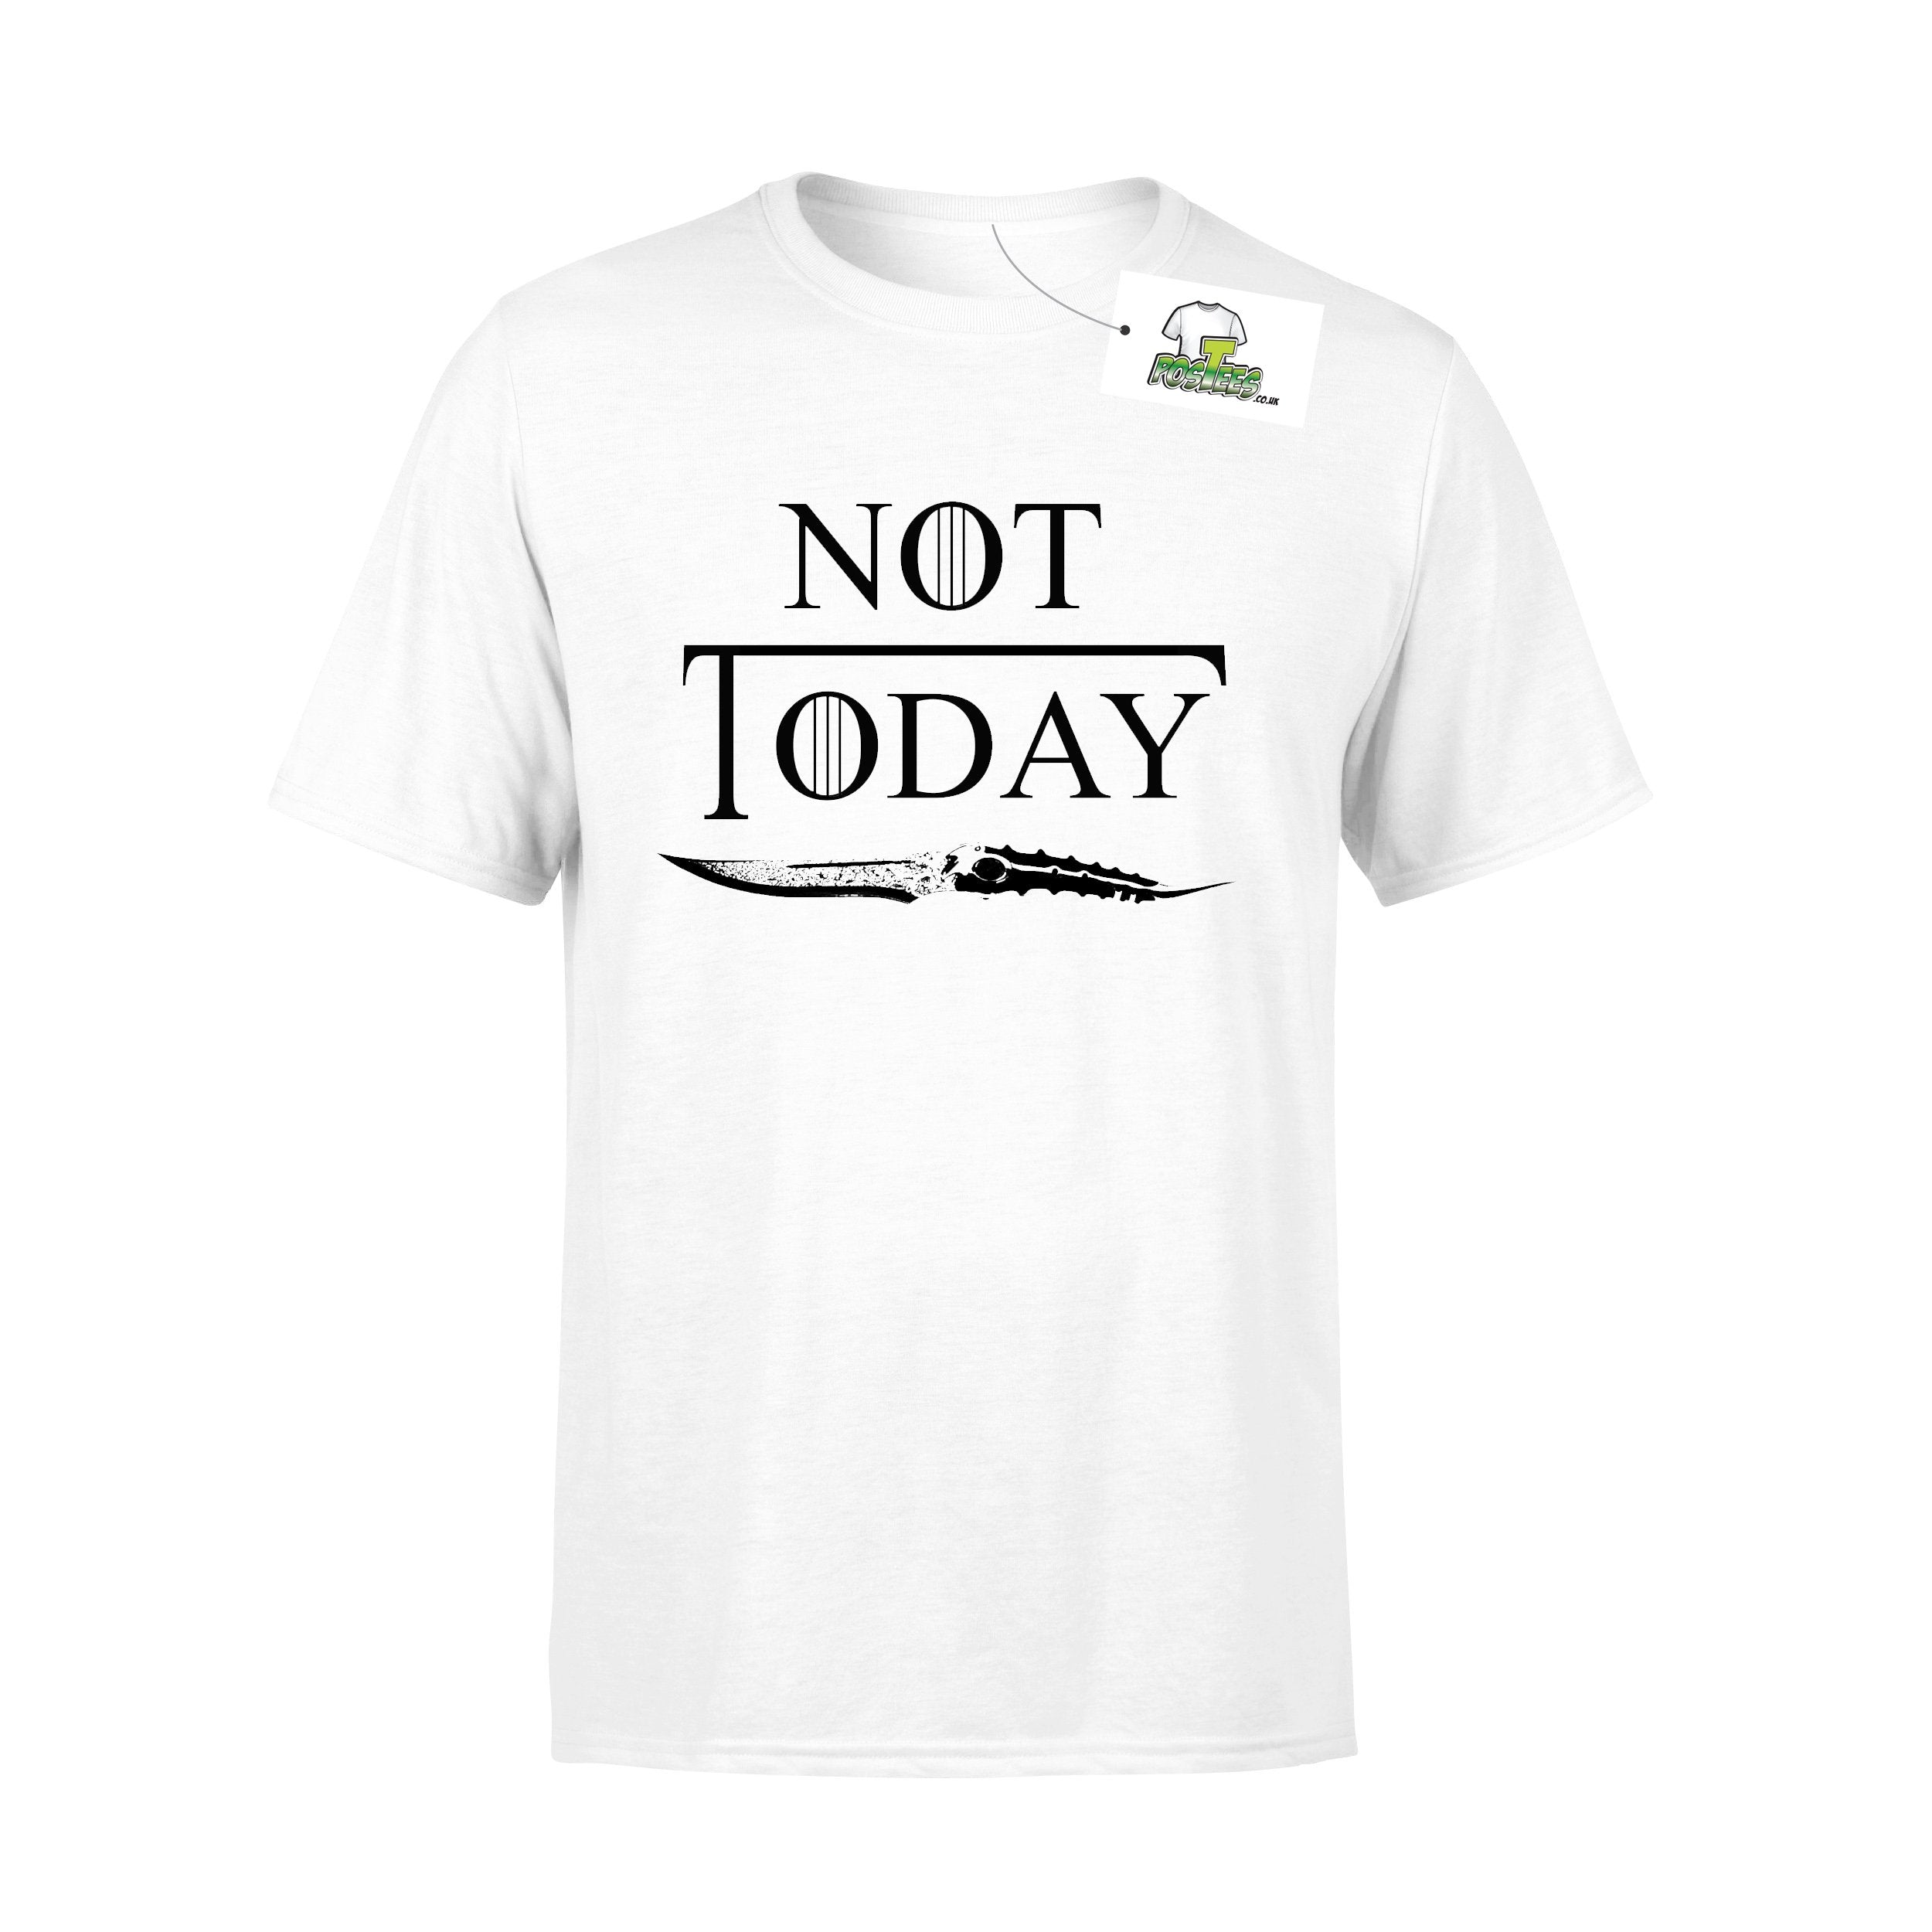 Game of Thrones Inpsired Arya Stark Not Today T-shirt - Postees